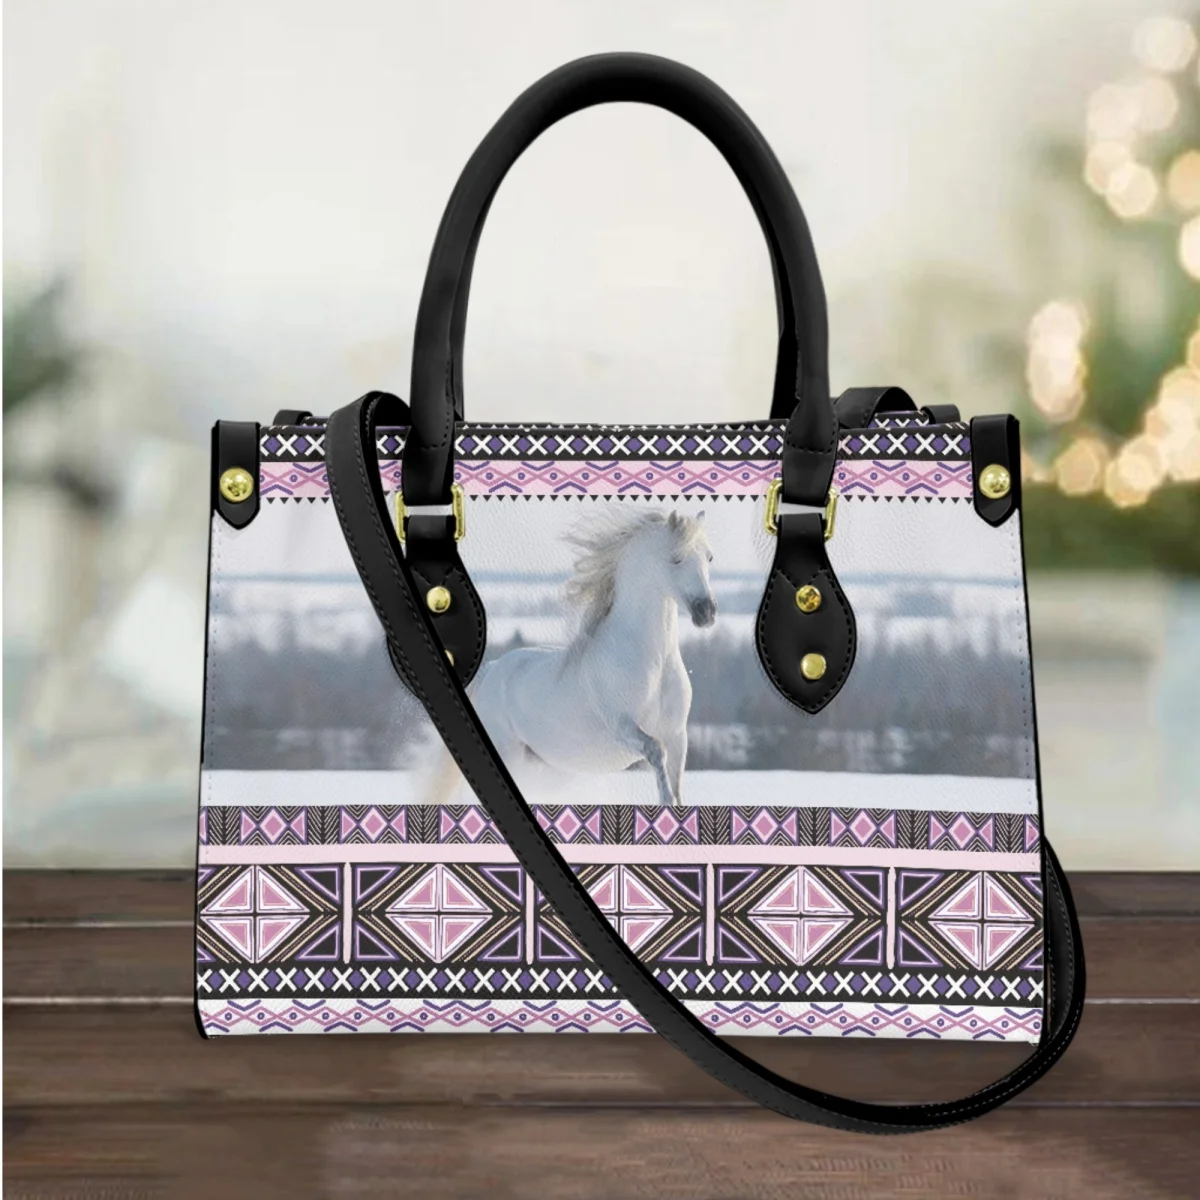 

FORUDESIGNS Abstract Tribal Pattern Woman's Leather Crossbody Bag Galloping Horse Print Handbag Casual for Ladies Elegant Totes